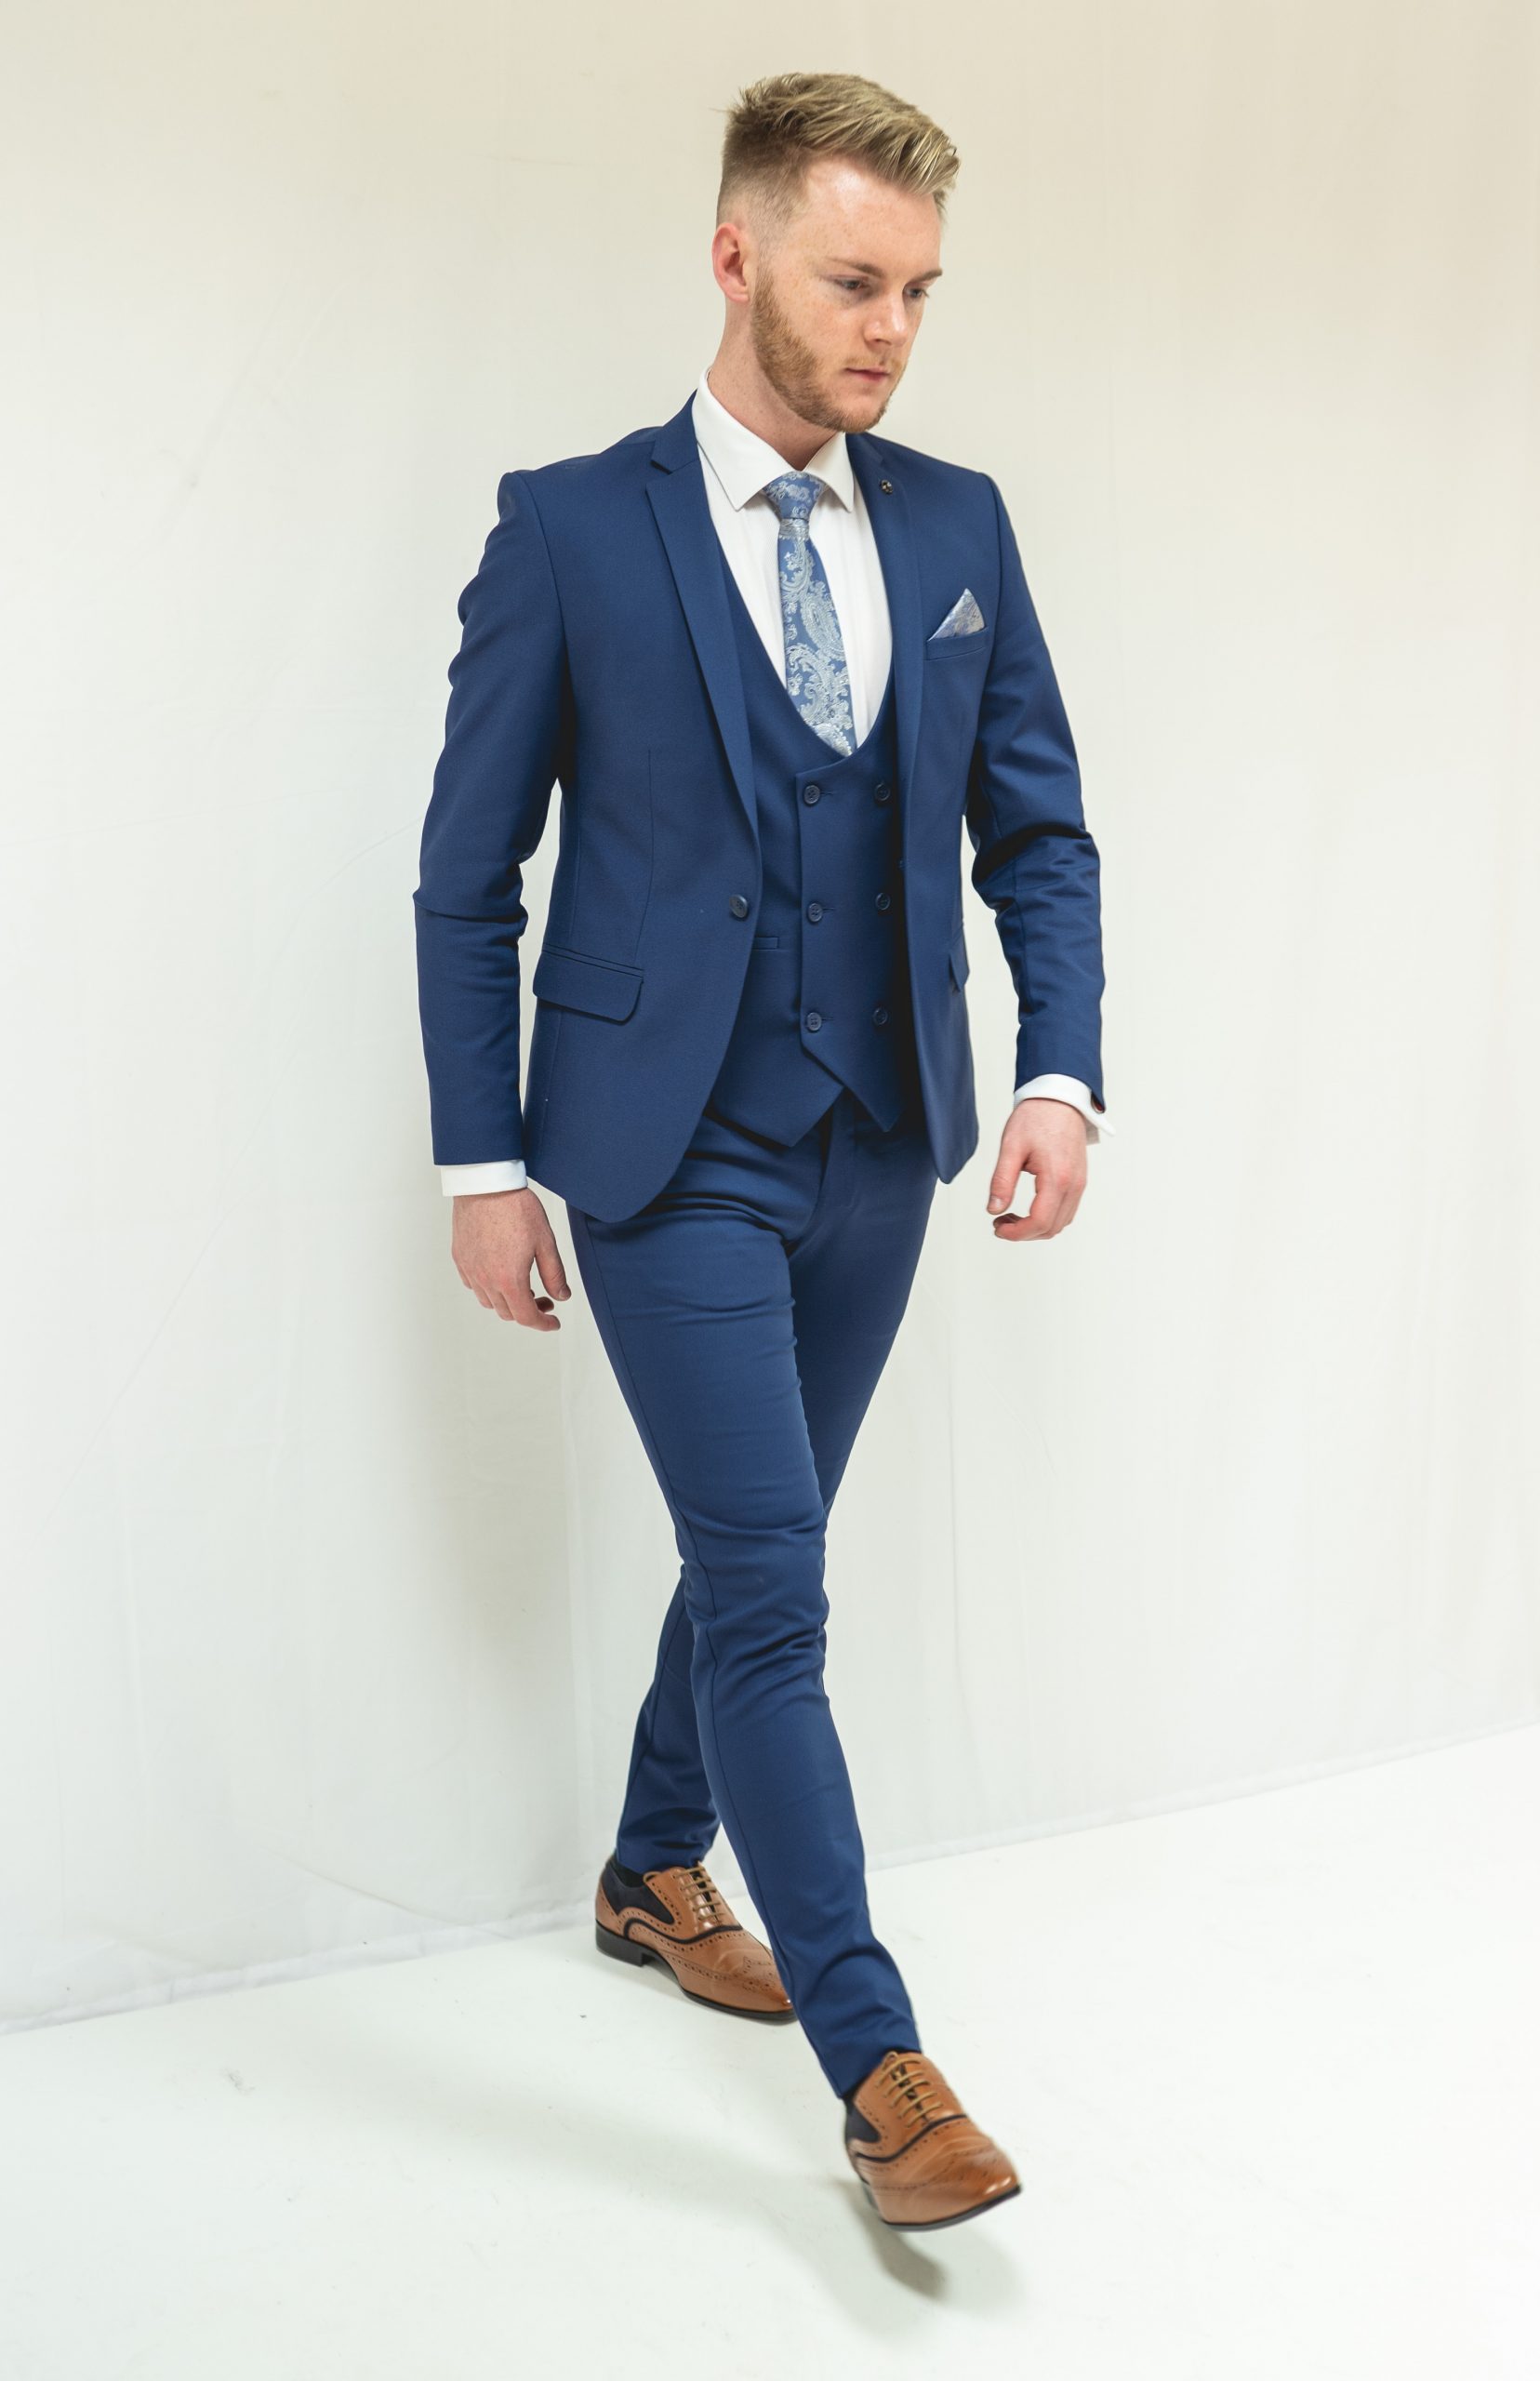 Royal Blue 3 Piece Suit With Double Breasted Waistcoat | Suits ...